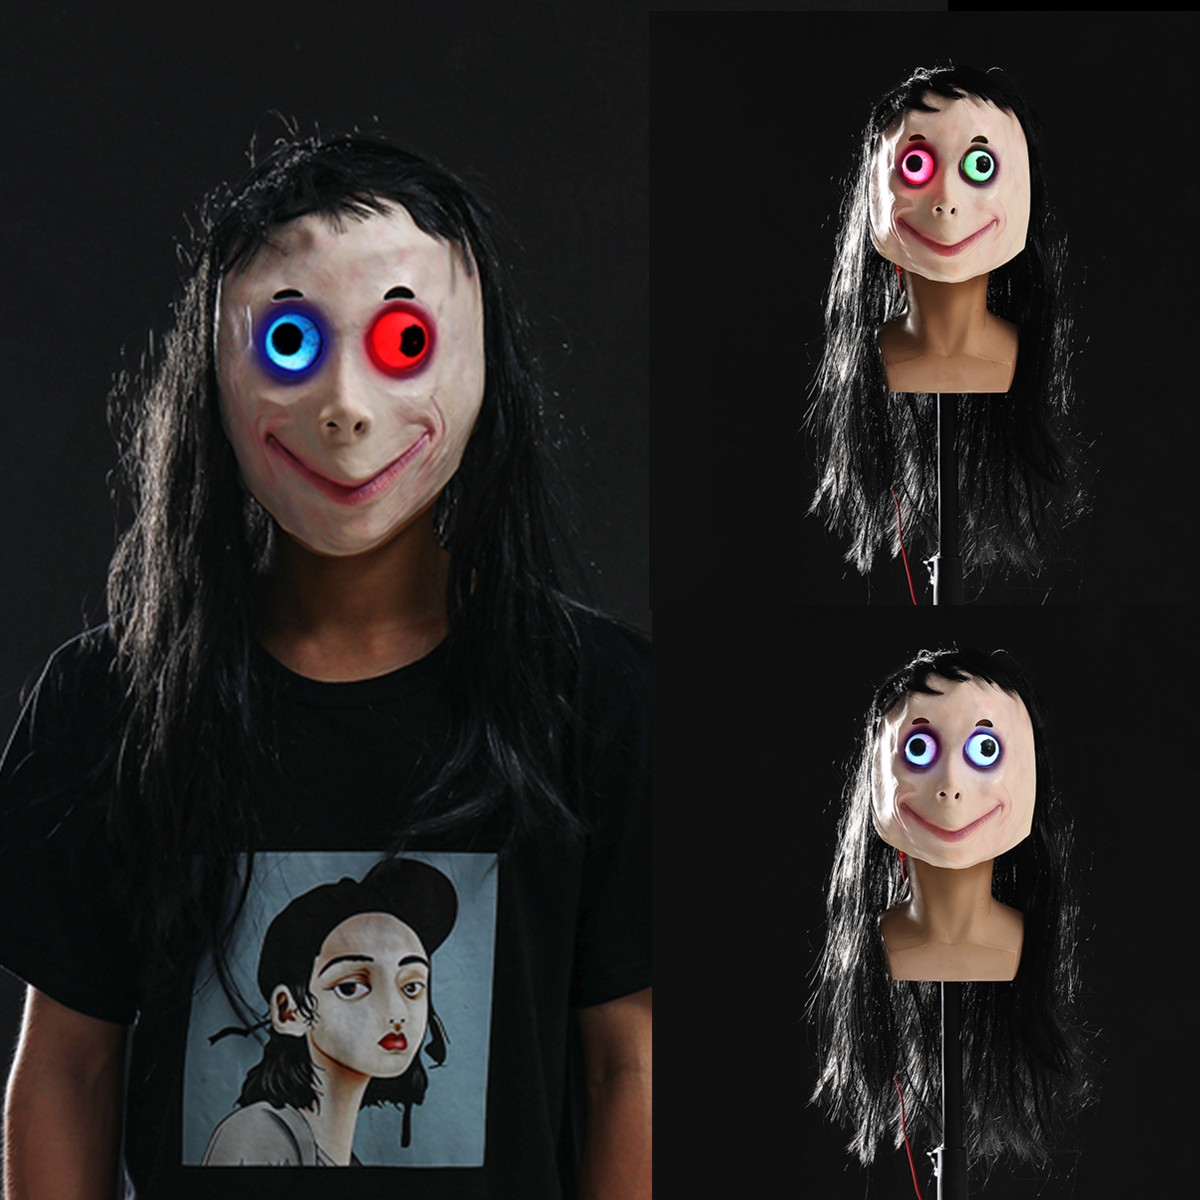 

LED Scary Momo Mask Game Horror Mask Cosplay Full Head Momo Mask Big Eye With Long Wigs Halloween Party Props